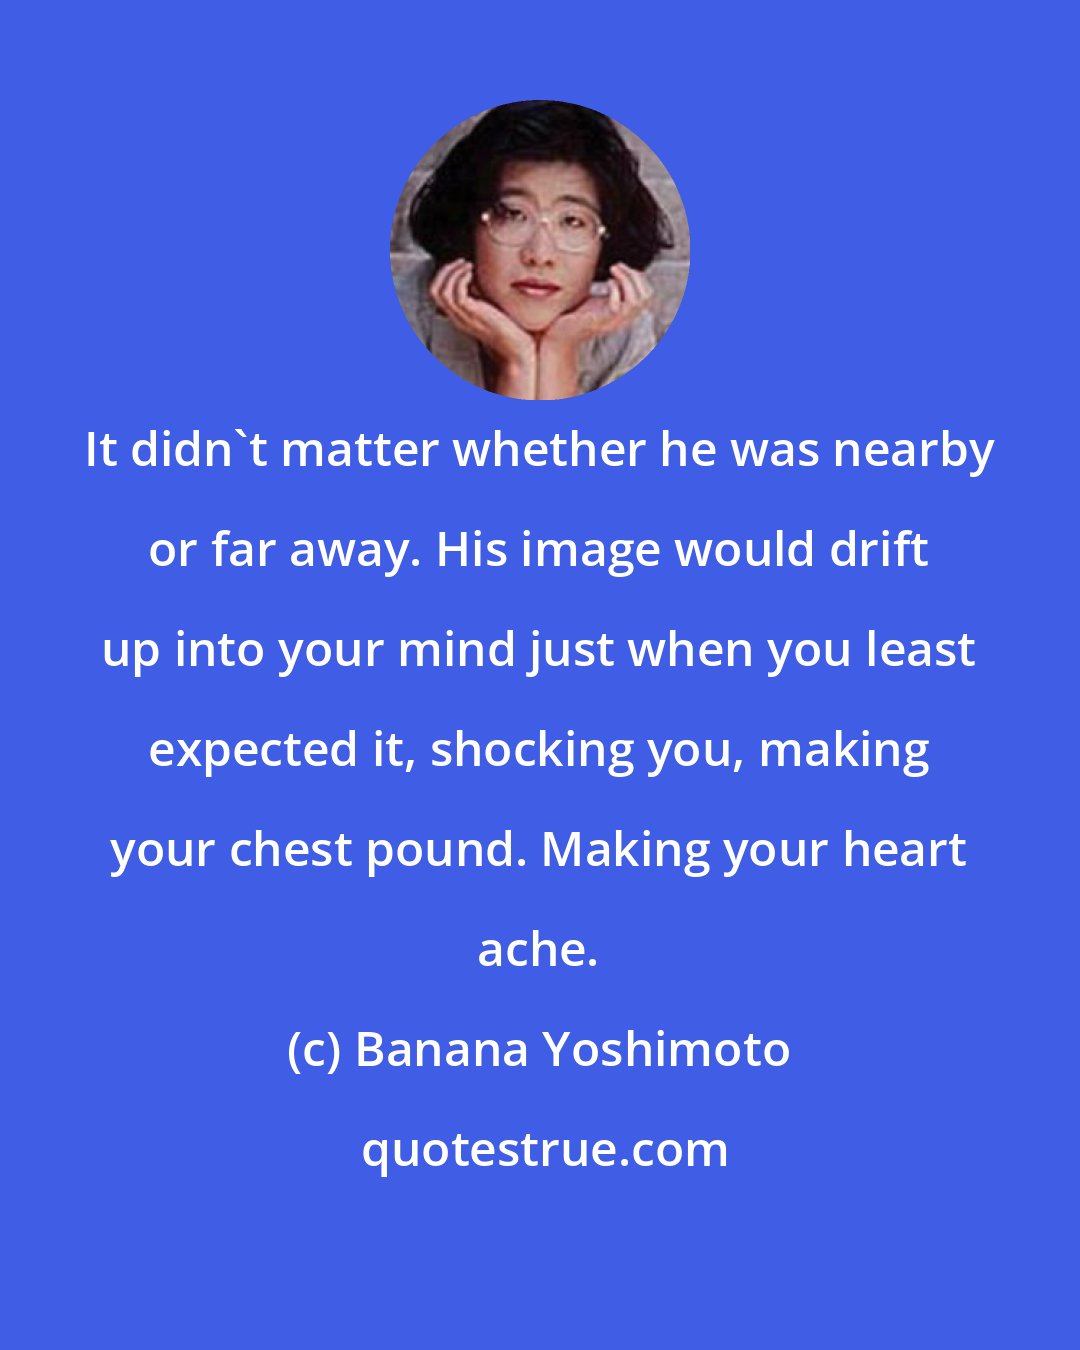 Banana Yoshimoto: It didn't matter whether he was nearby or far away. His image would drift up into your mind just when you least expected it, shocking you, making your chest pound. Making your heart ache.